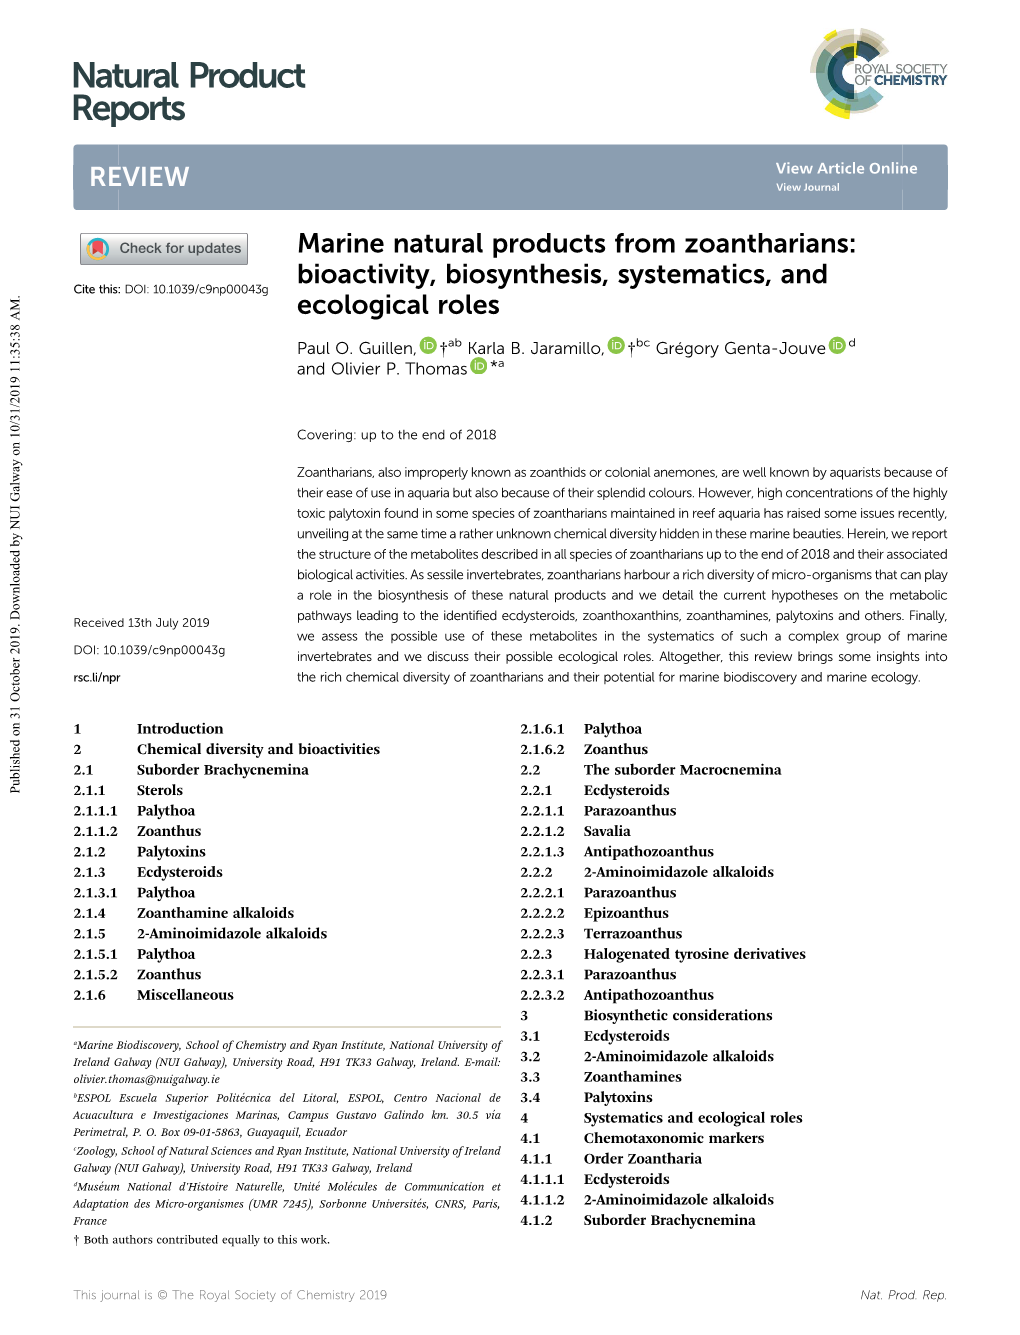 Marine Natural Products from Zoantharians: Bioactivity, Biosynthesis, Systematics, and Cite This: DOI: 10.1039/C9np00043g Ecological Roles